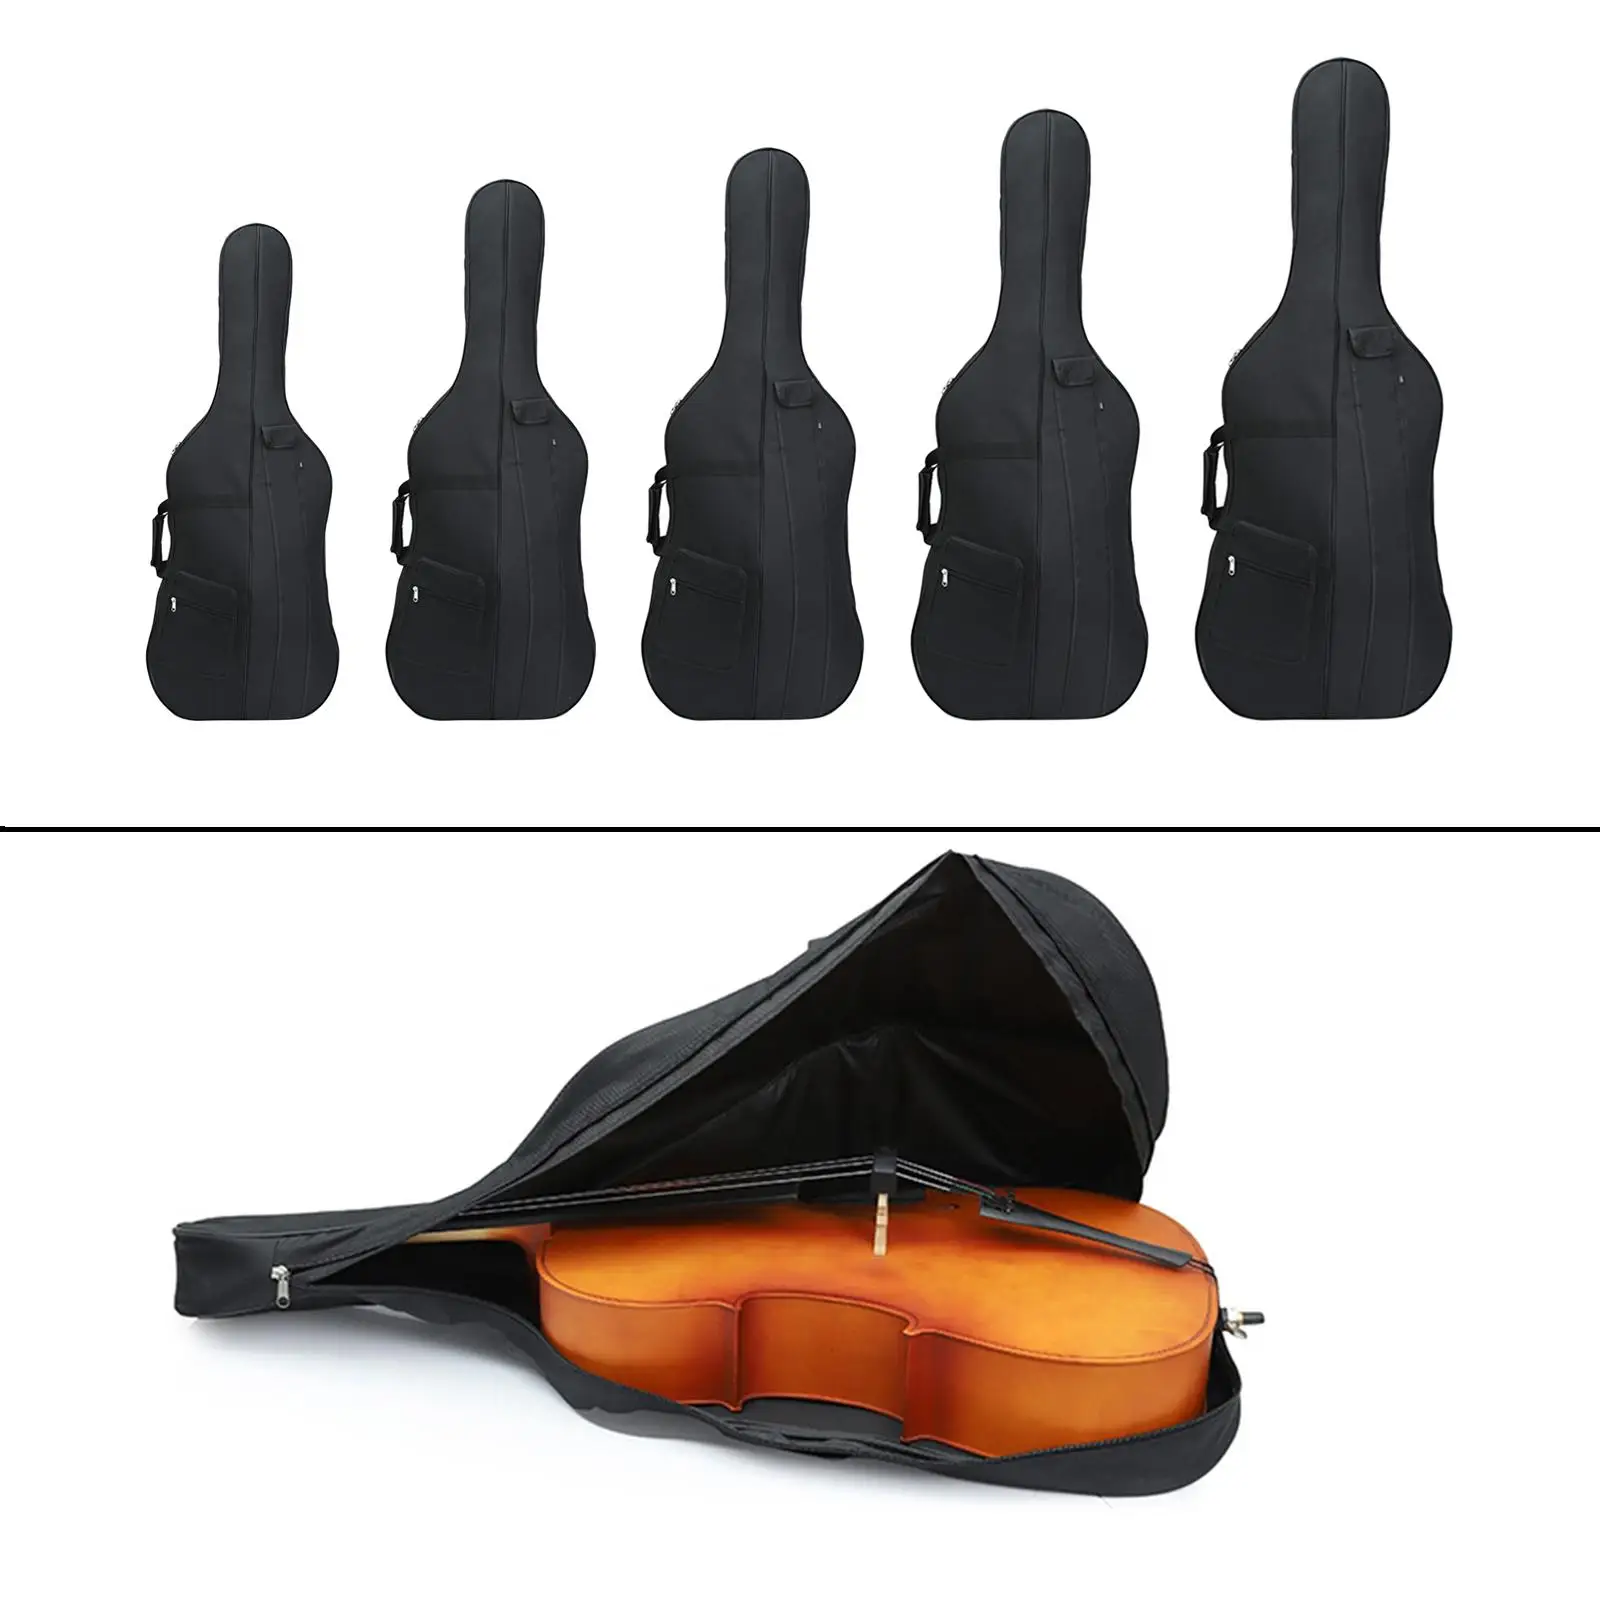 Gig Bag Oxford Fabric Protective with Back Straps Portable Soft Cello Case for